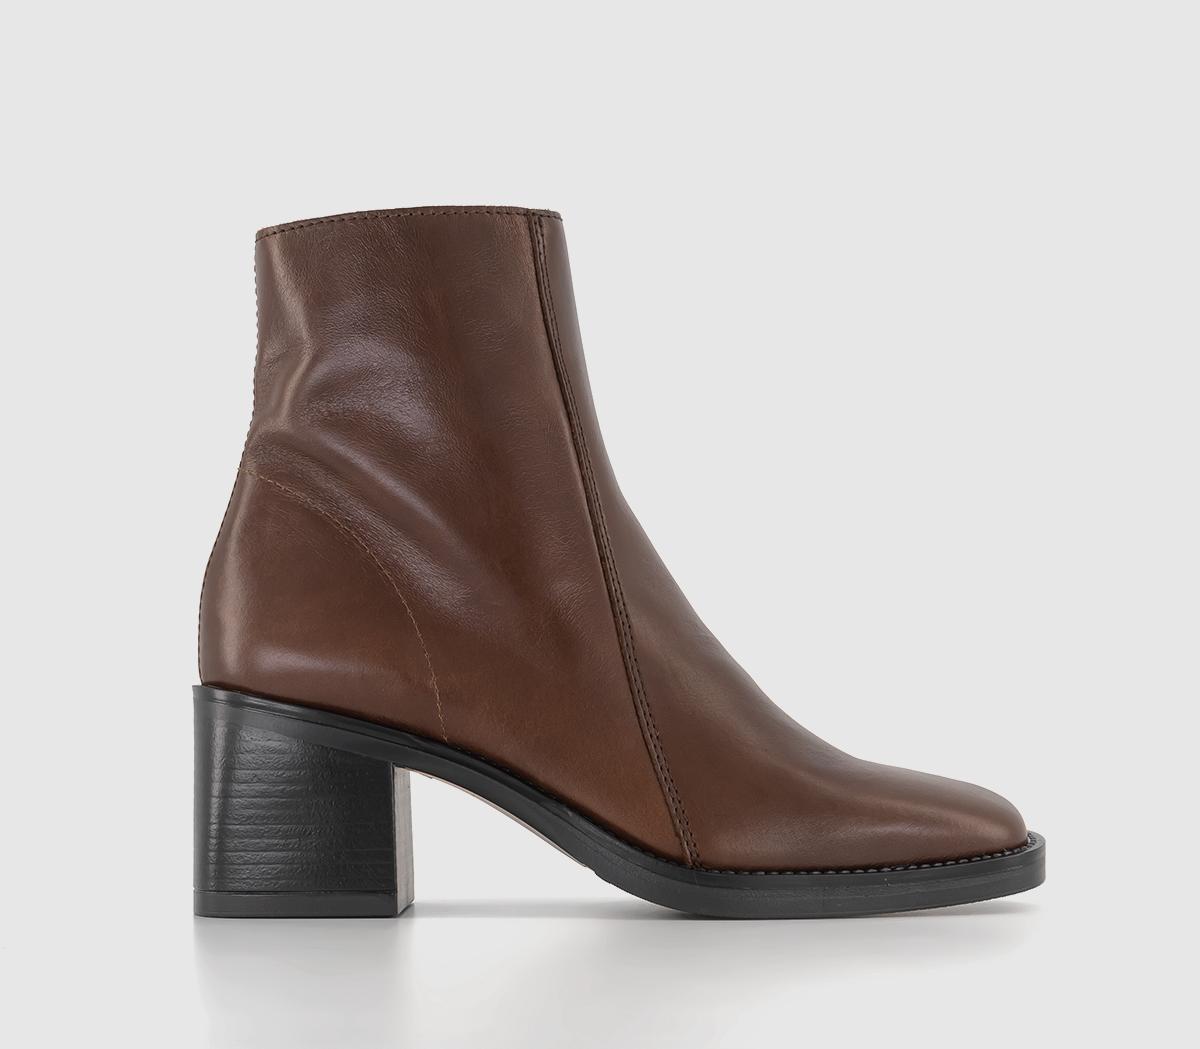 OFFICEAnnabella Square Toe Leather Block Heel BootsBrown Leather